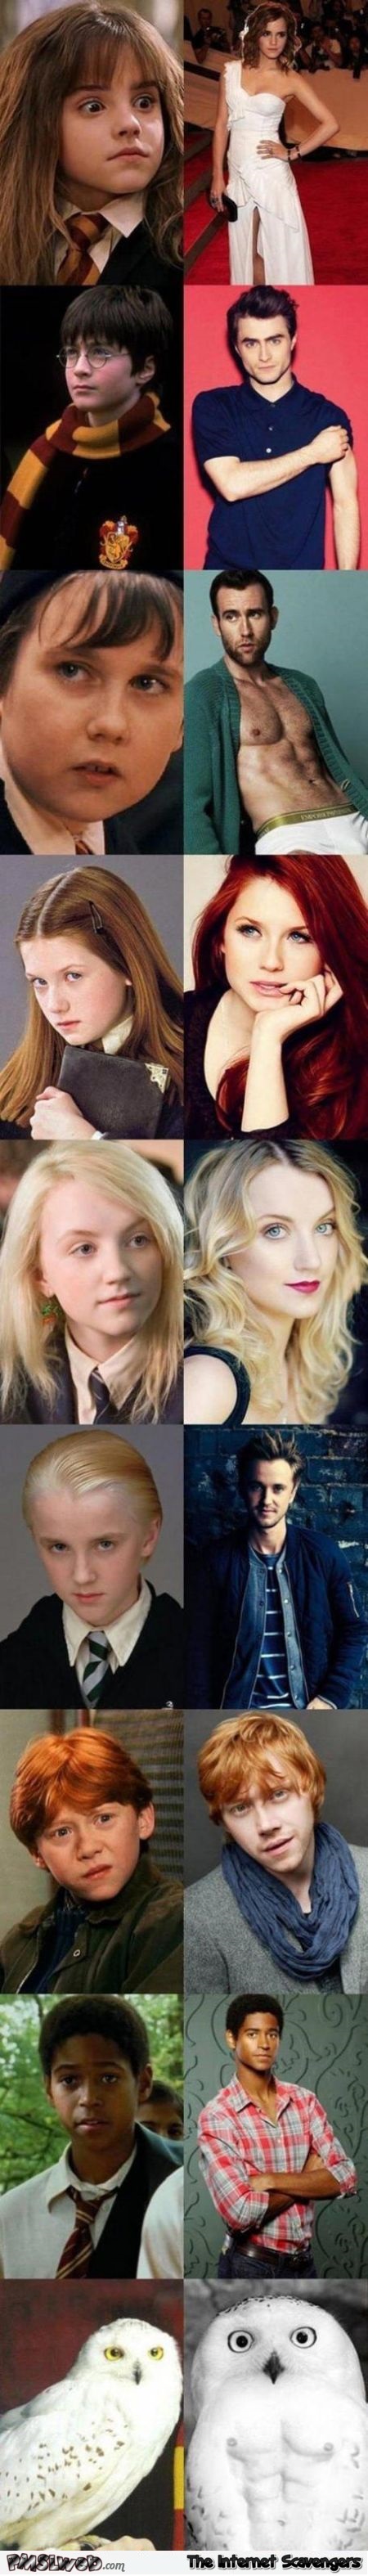 Funny Harry Potter then and now at PMSLweb.com